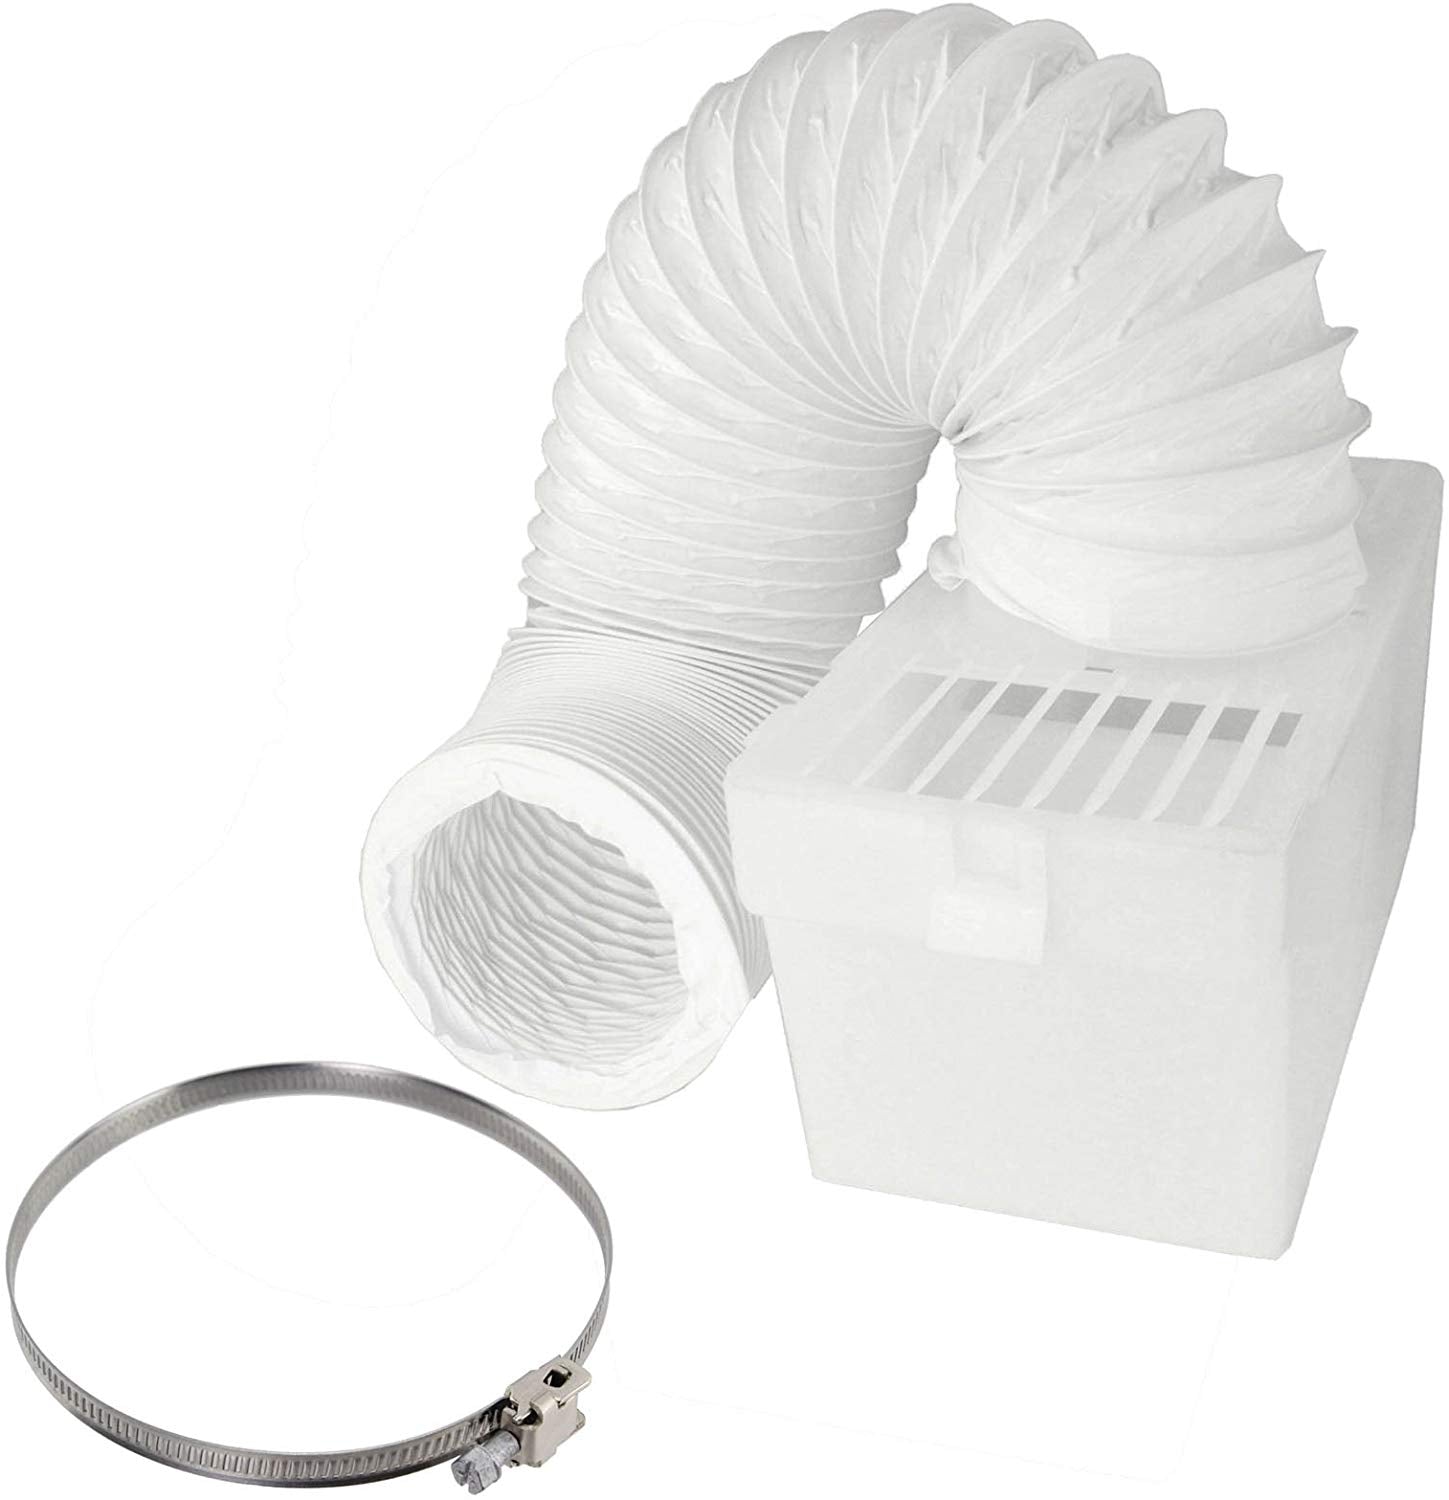 Condenser Vent Box & Hose Kit With Screw Clip for Proline Vented Tumble Dryer (4" / 100mm Diameter)